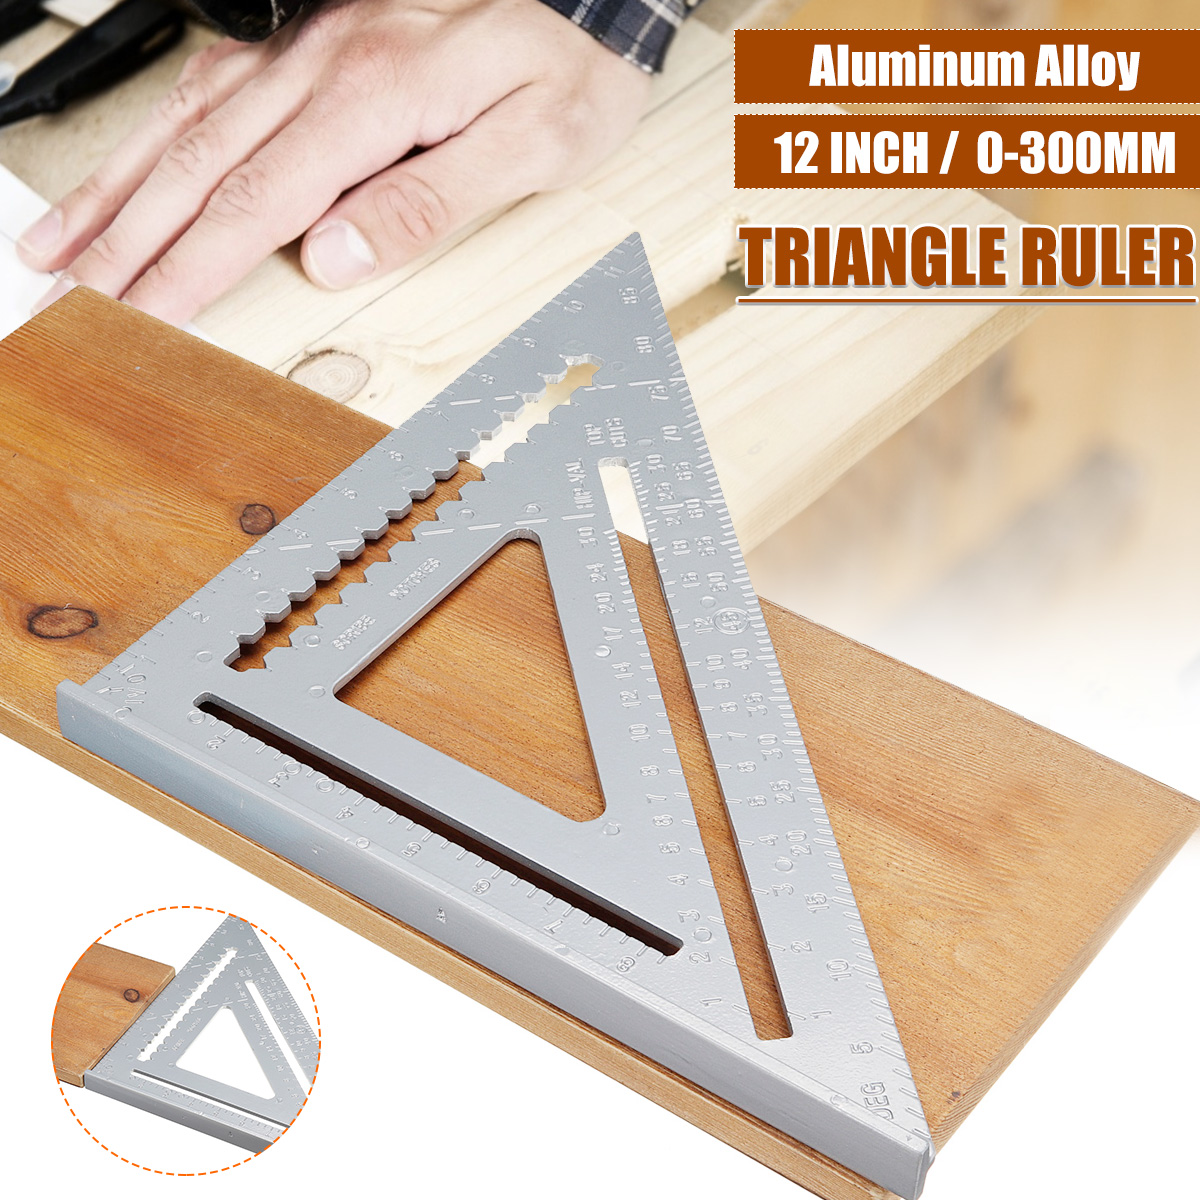 Aluminum-Alloy-Angle-Square-Triangle-Ruler-Roofing-Carpenter-Woodworking-Tool-1779182-4